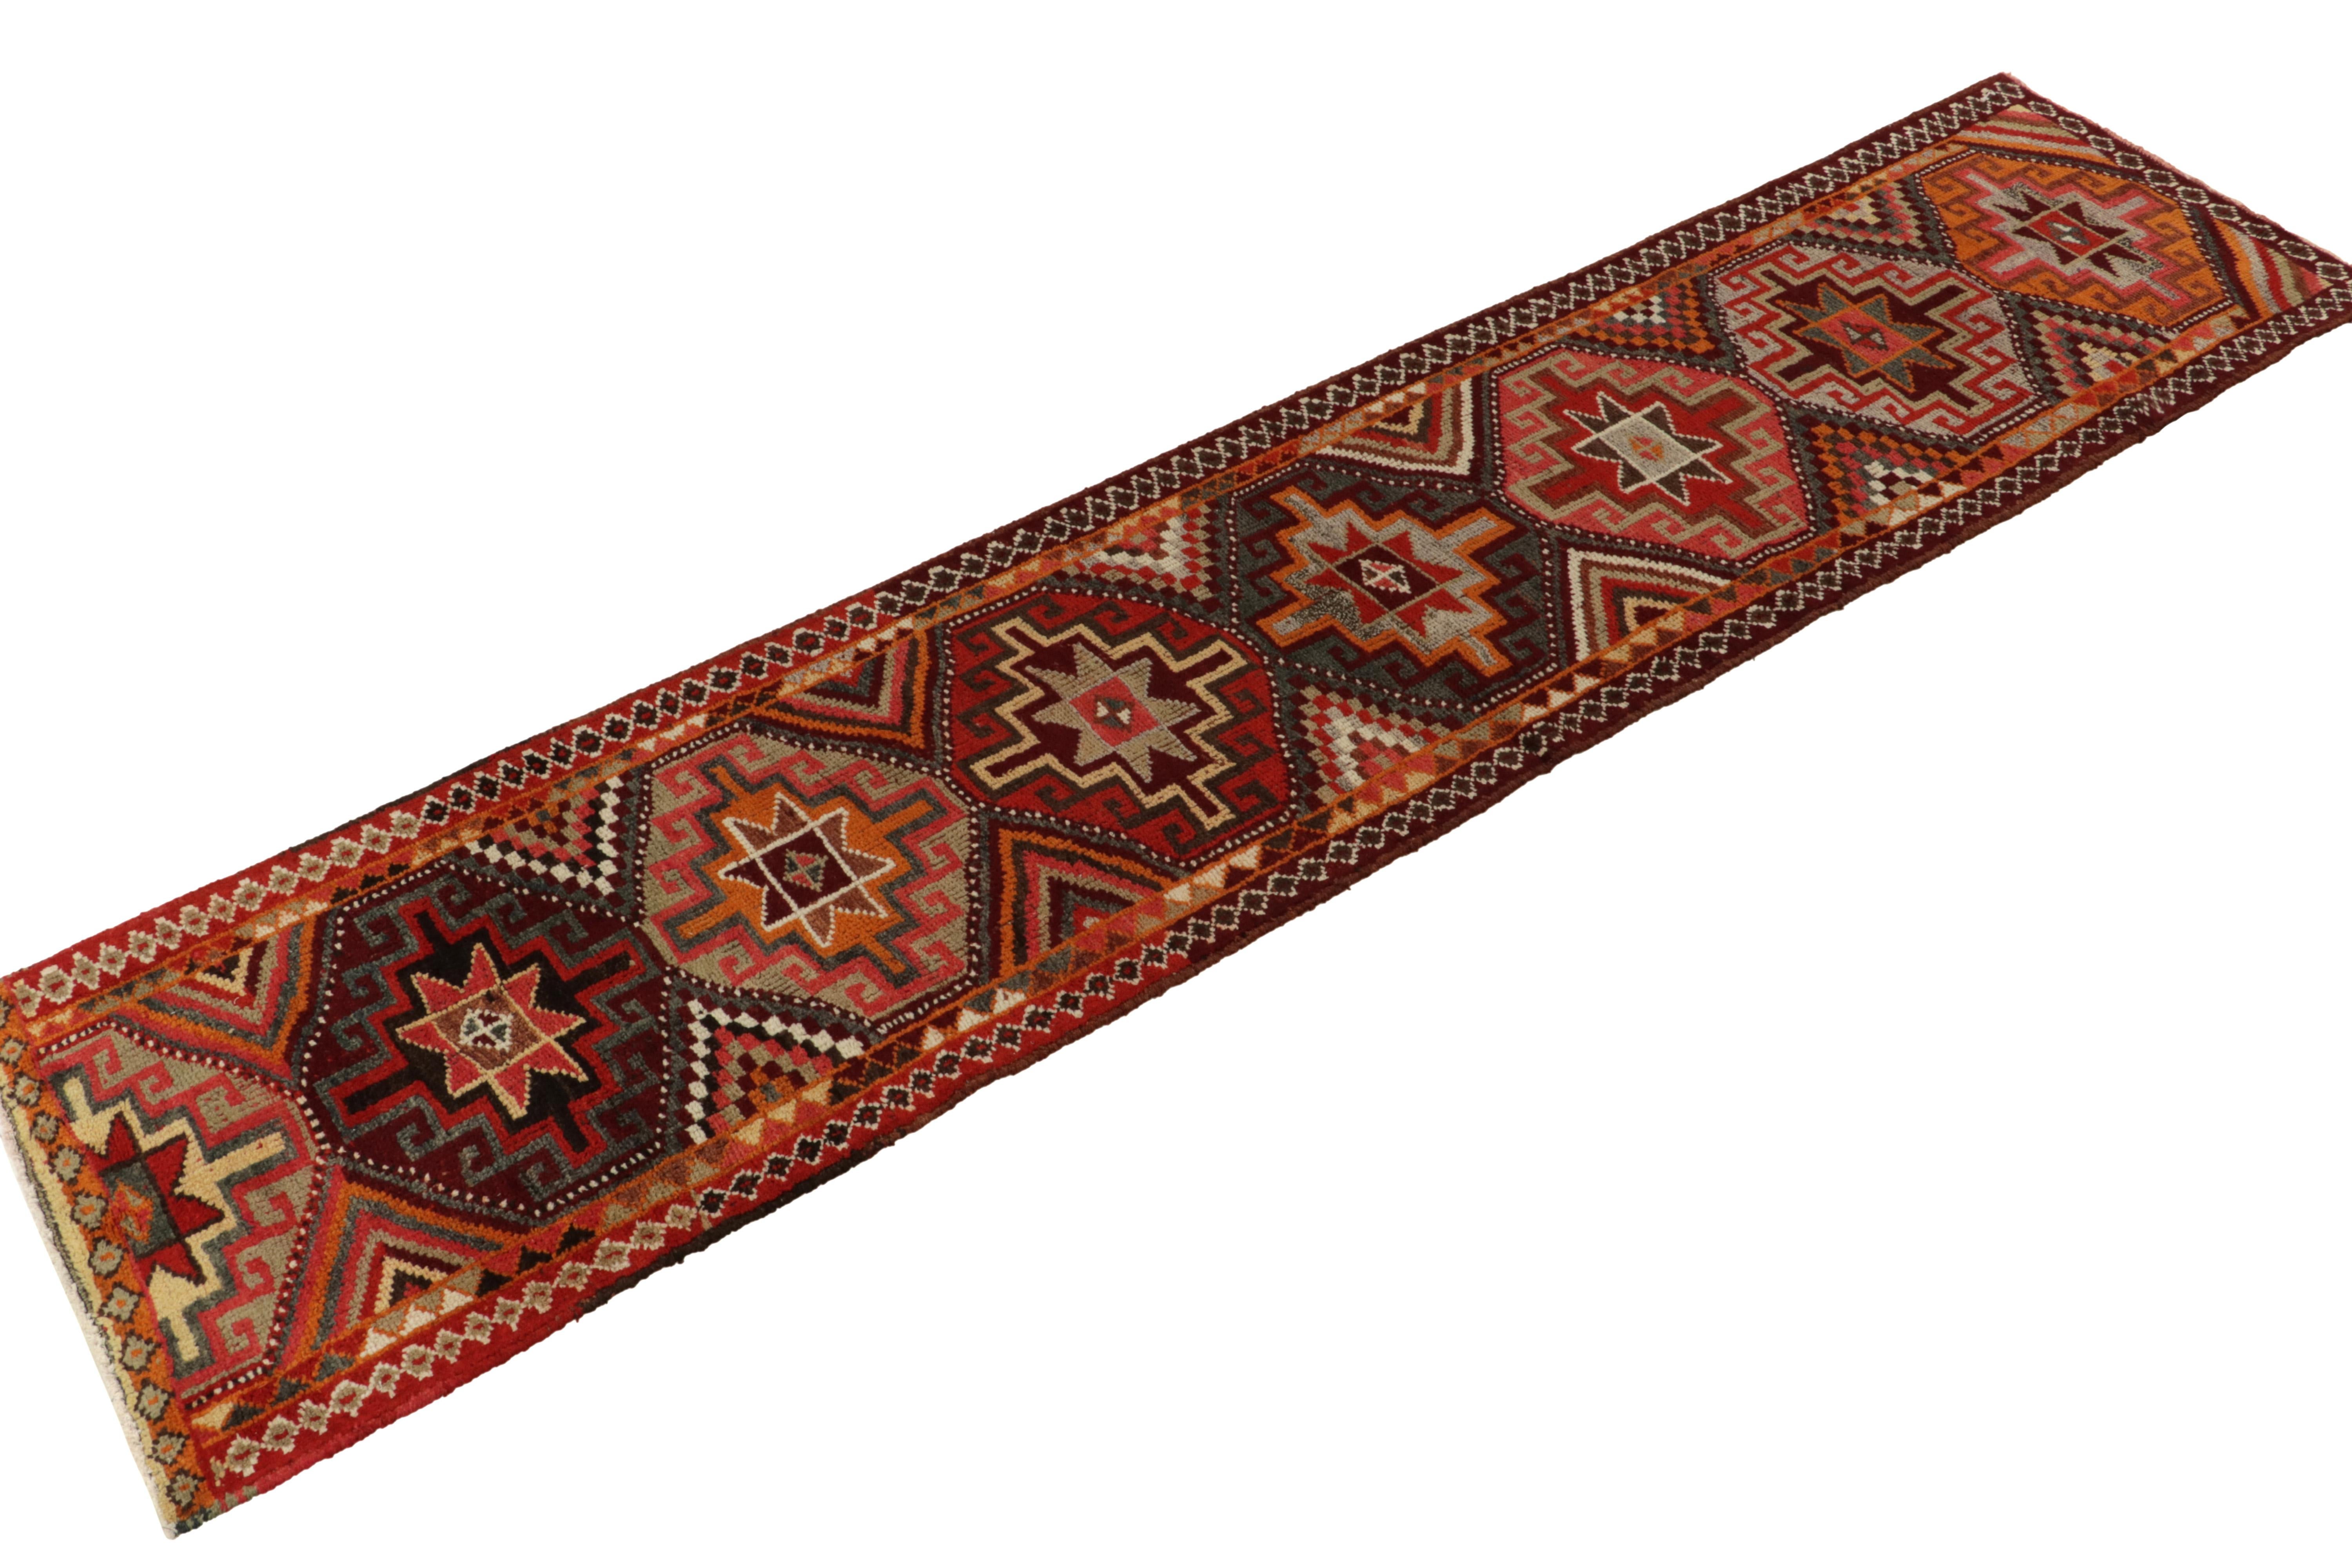 Hand-knotted in wool, a 3x13 runner from Rug & Kilim’s latest curation of rare tribal pieces. 

Originating from Turkey circa 1950-1960, the rug enjoys a series of repeating hexagonal star guls on the field—traditional motifs in rich tones of